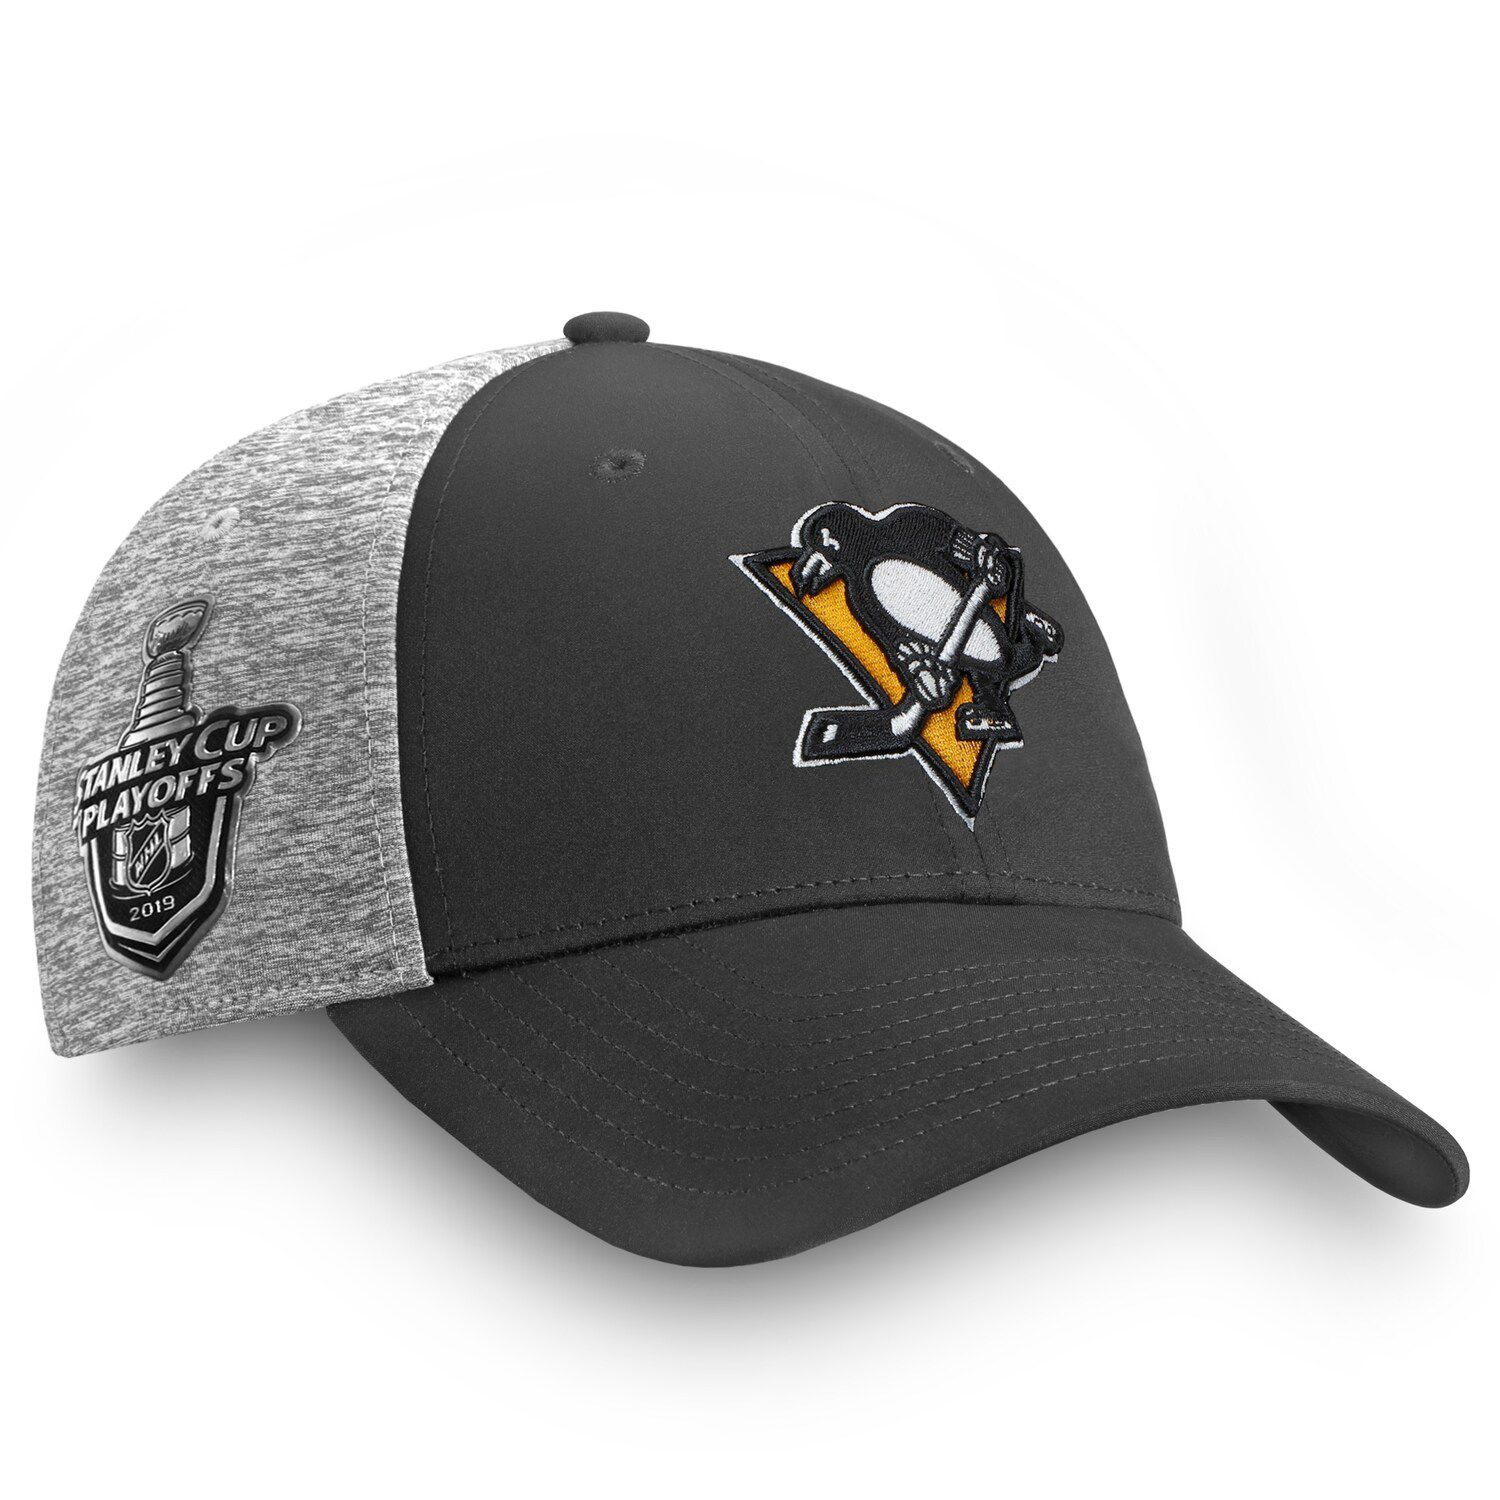 pittsburgh stanley cup hat